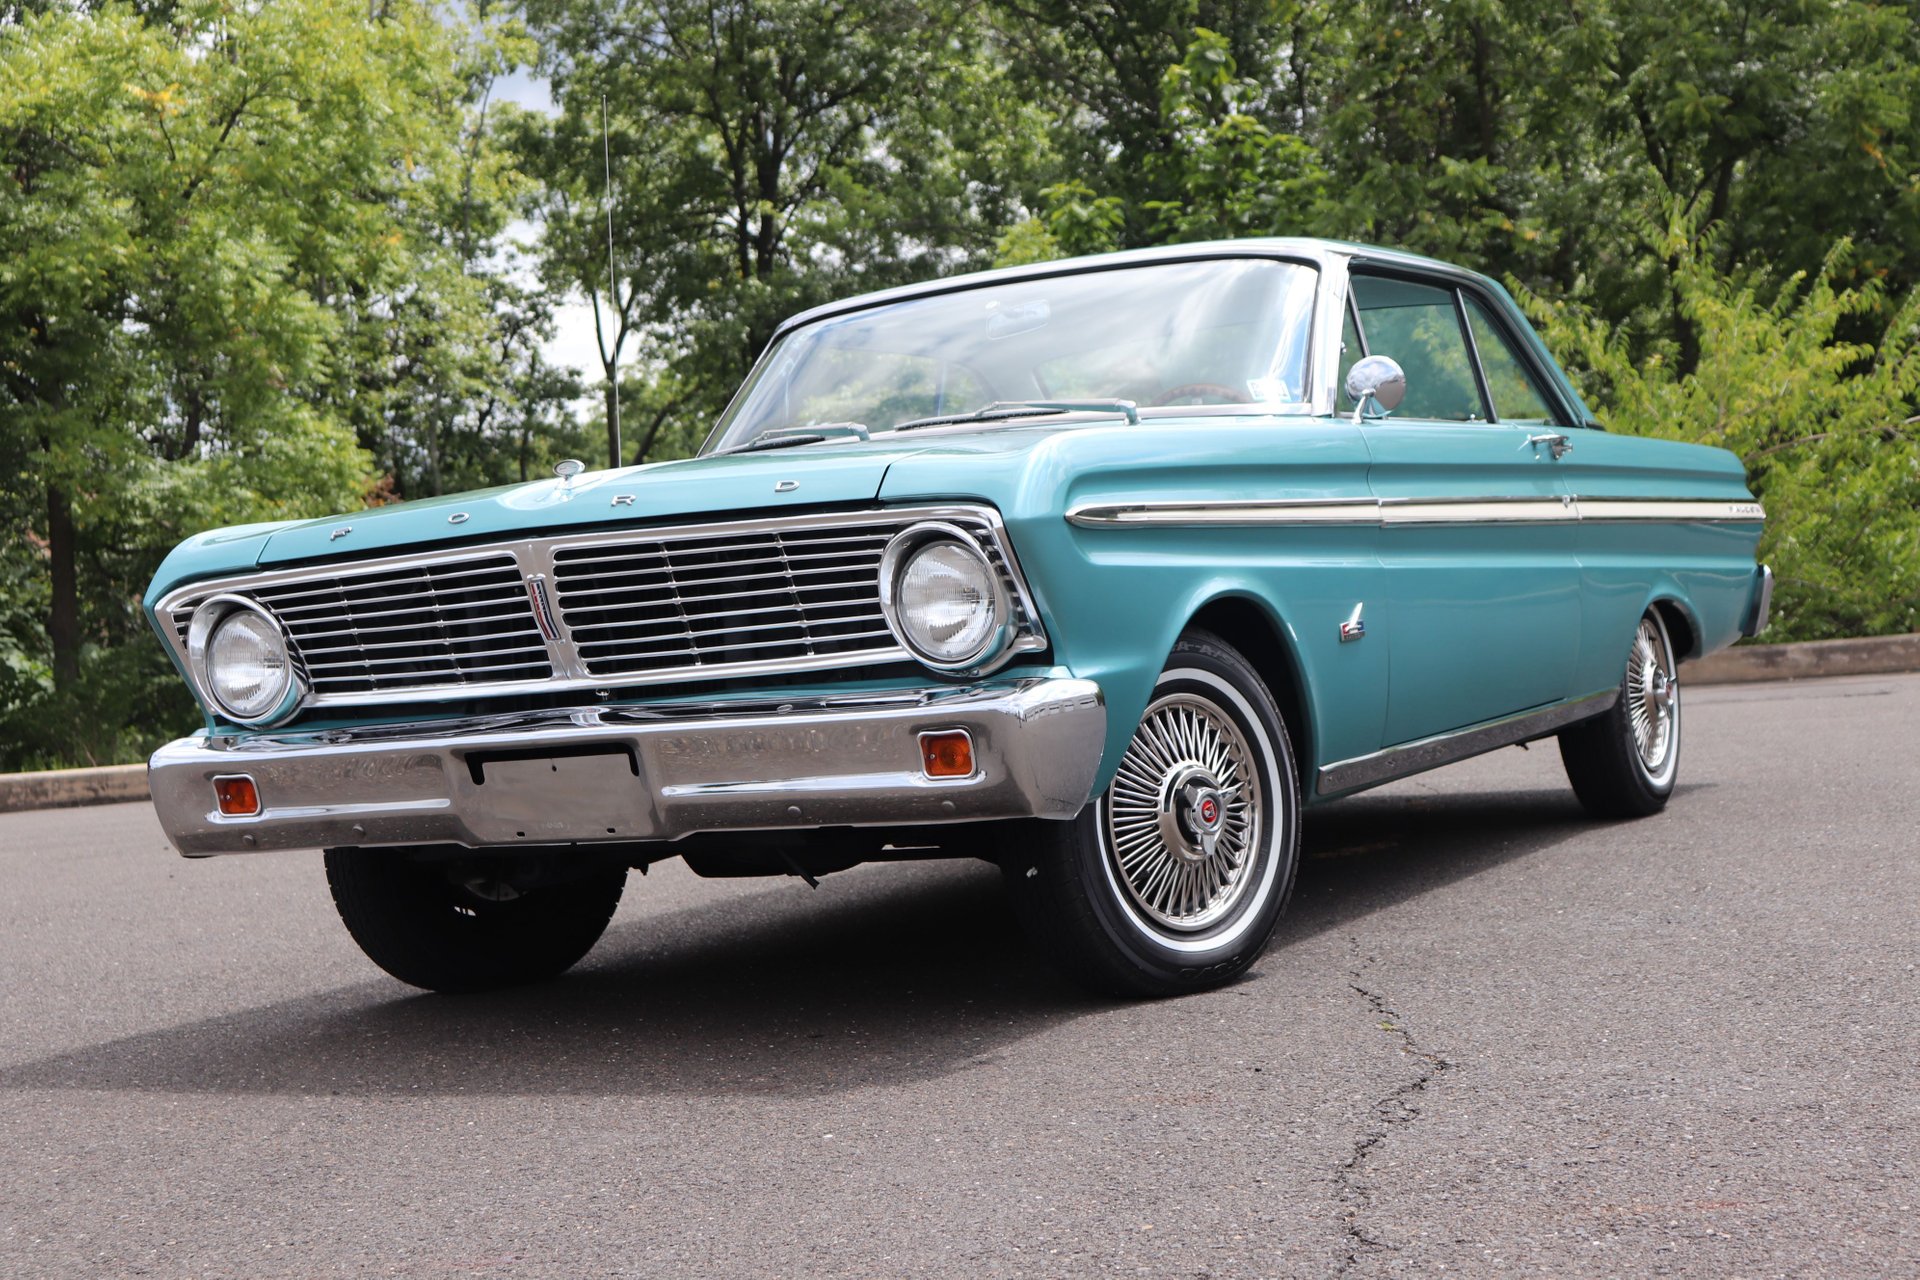 1965 Ford Falcon | Old Forge Motorcars Inc.